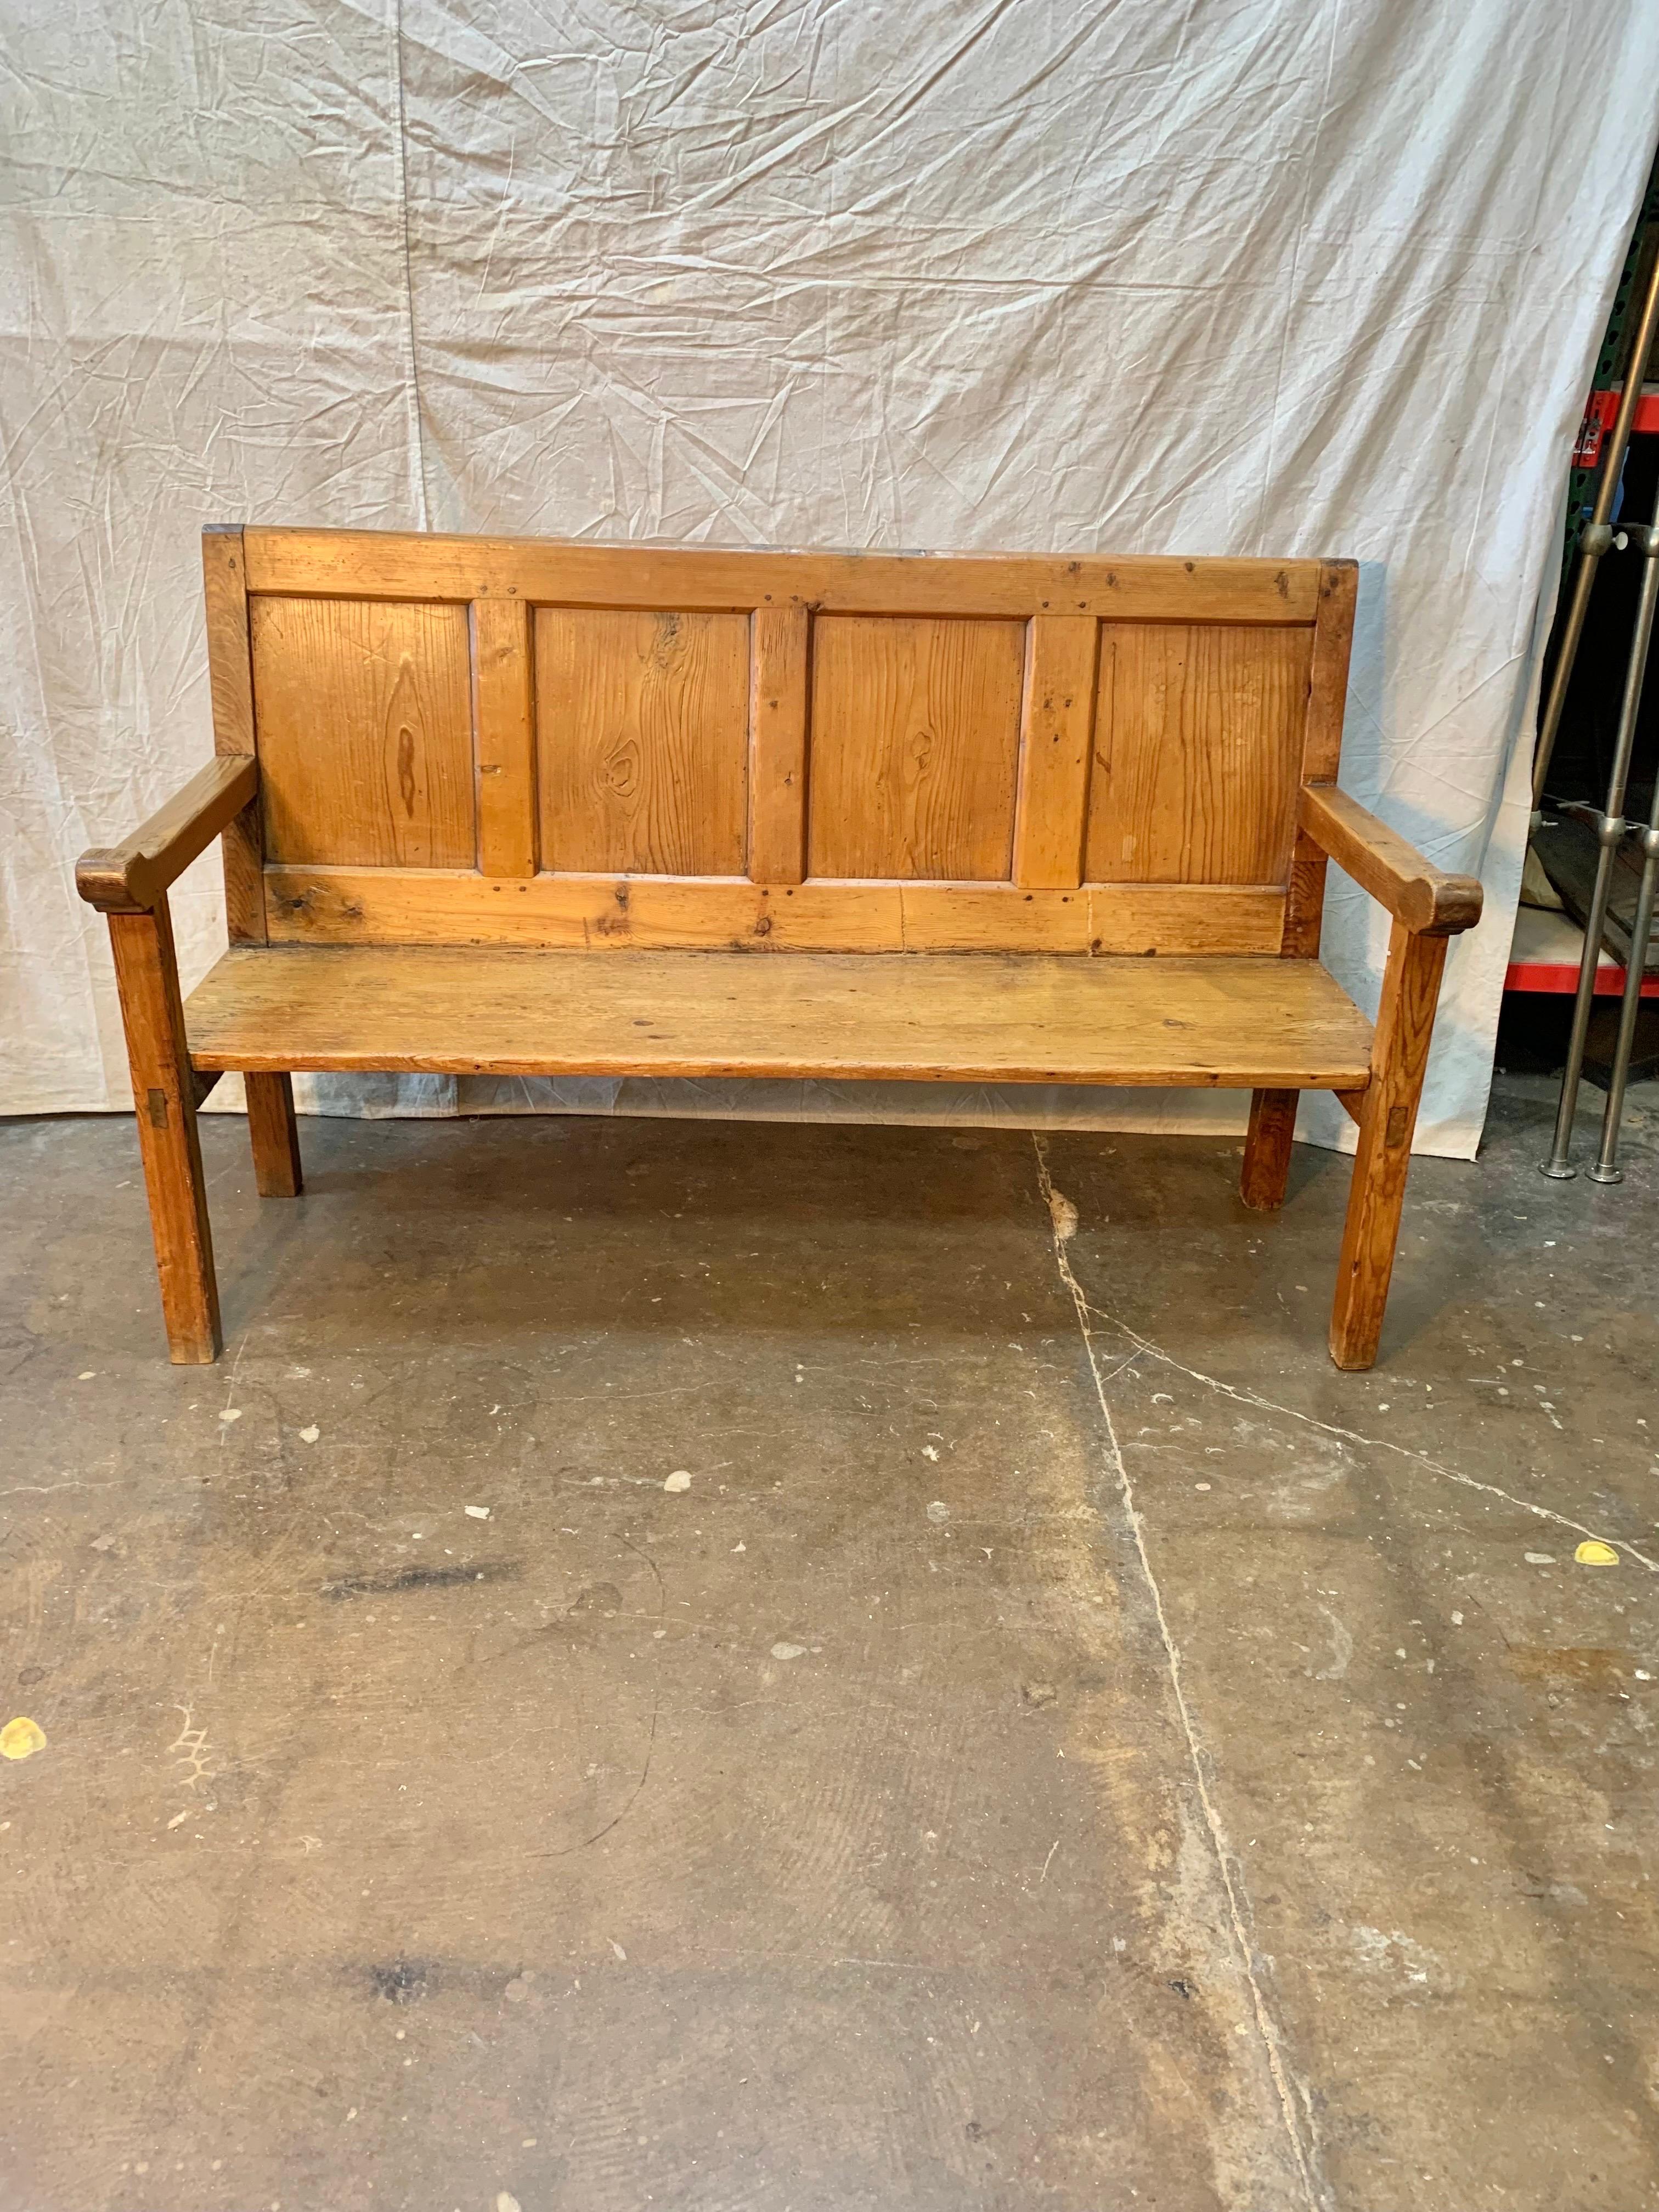 Found in the Burgundy Region of France, this Late 19th Century French Louis Philippe Bench was once used for seating by Monks in a monastery. Crafted from old growth pine, the bench features a four panelled back rest, carved open arms and is rasied